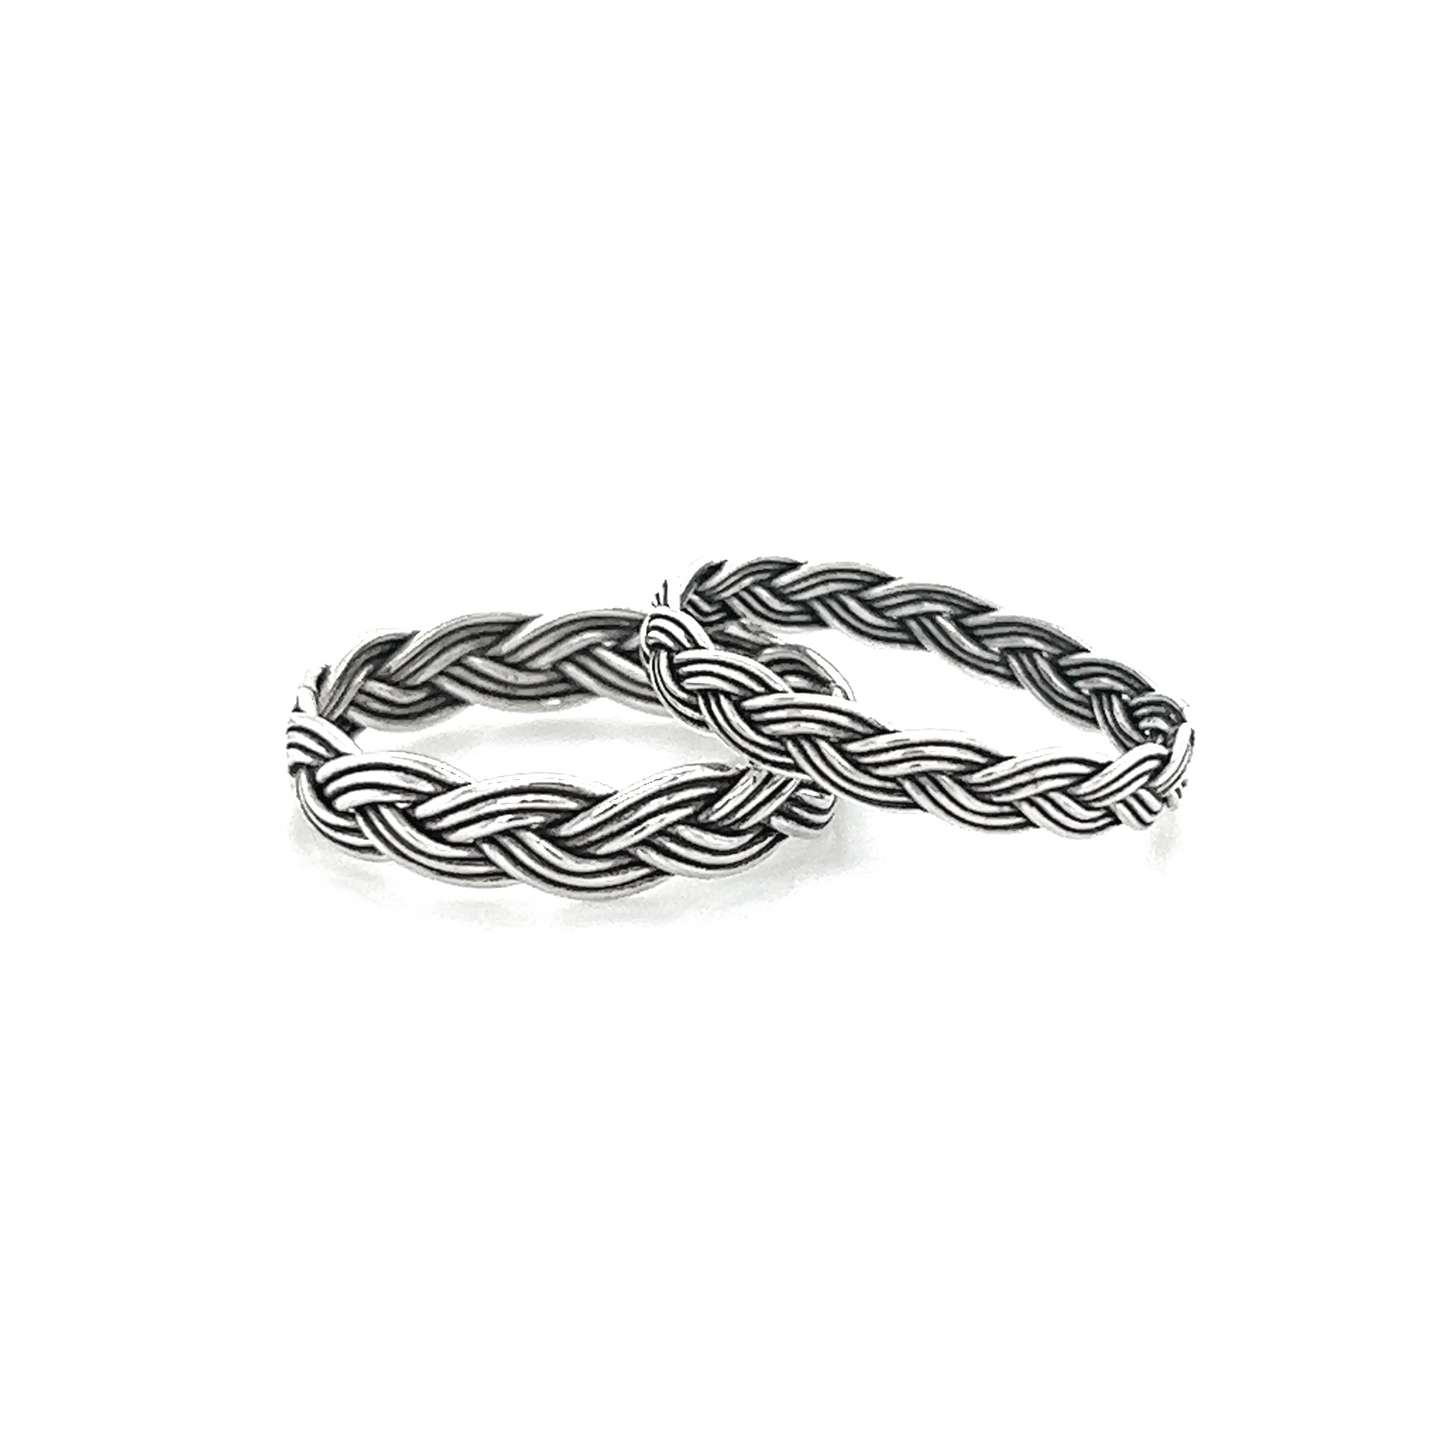 Two Super Silver Triple Strand Braided Bands, exuding a minimalist bohemian flair and vintage allure.